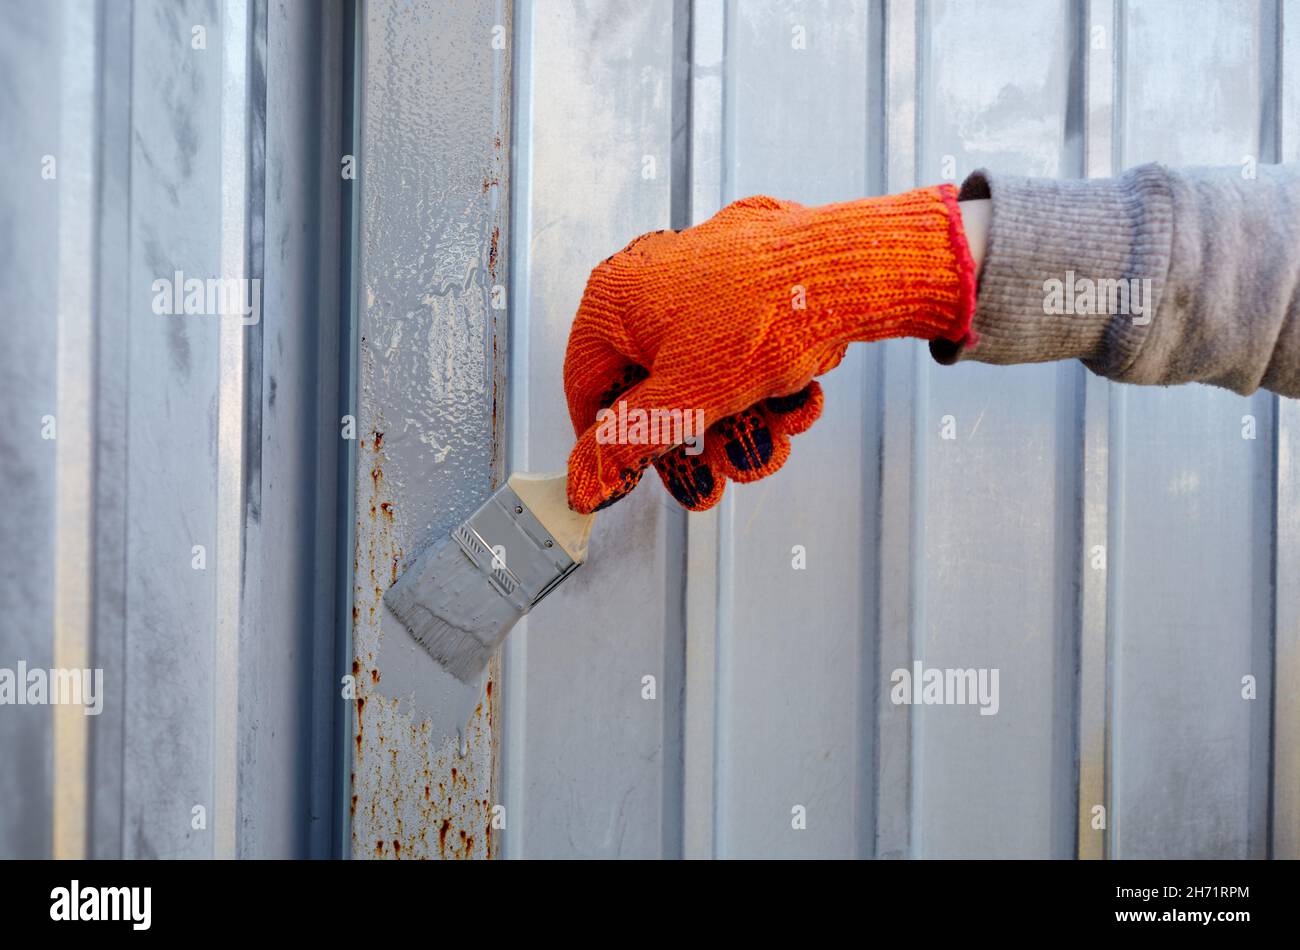 Painting the fence. Woman's hand painting steel fence with a brush Stock Photo